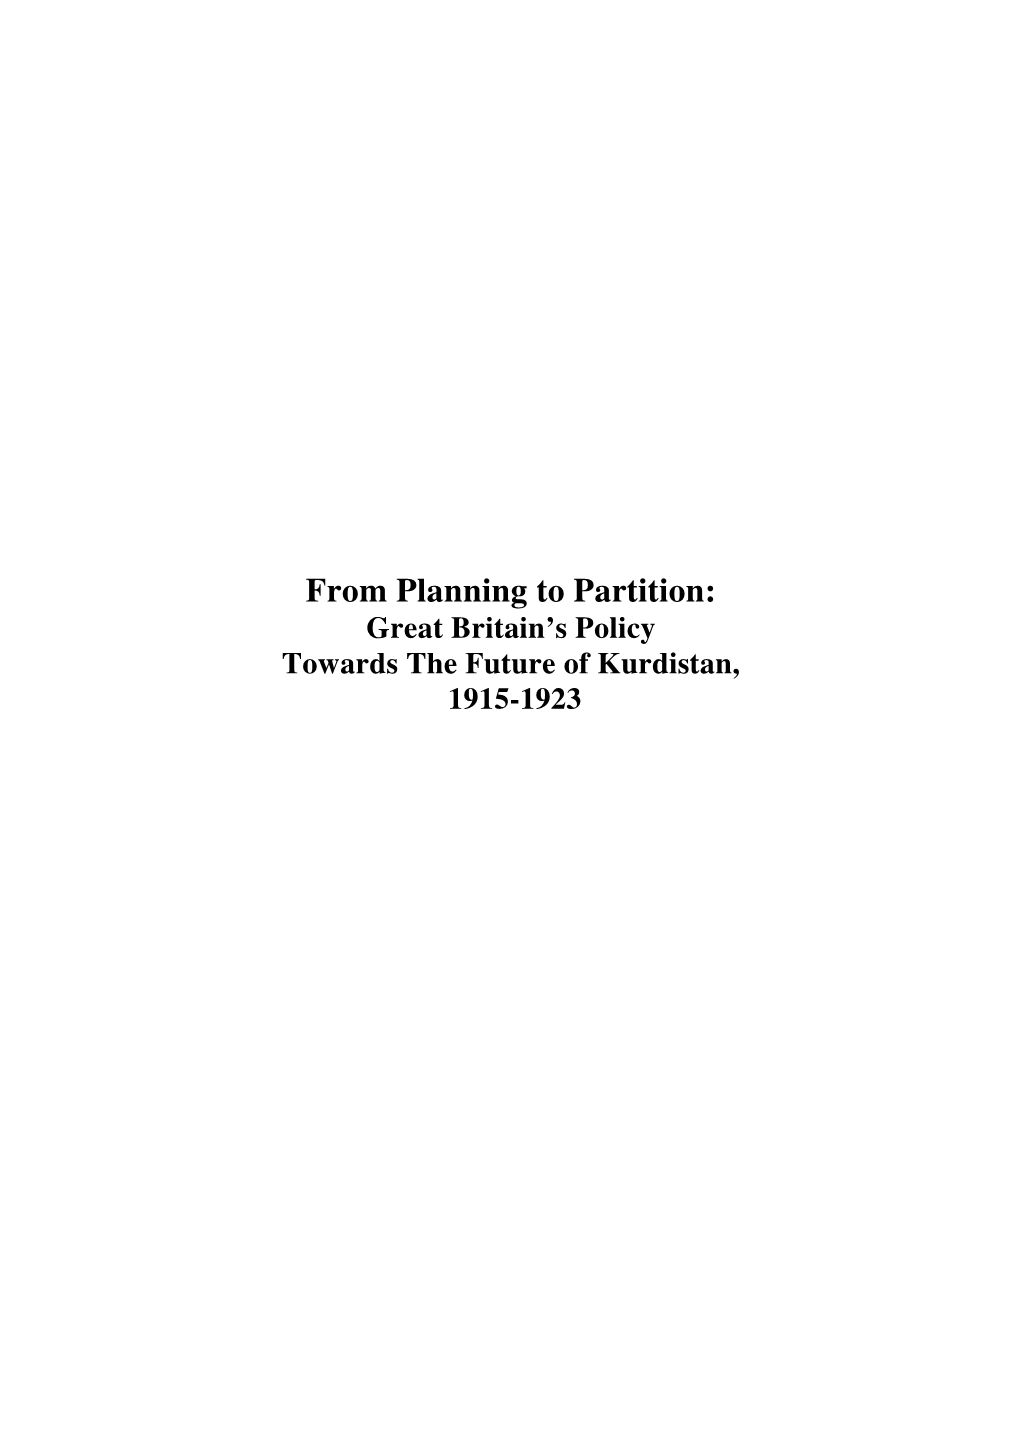 From Planning to Partition: Great Britain’S Policy Towards the Future of Kurdistan, 1915-1923